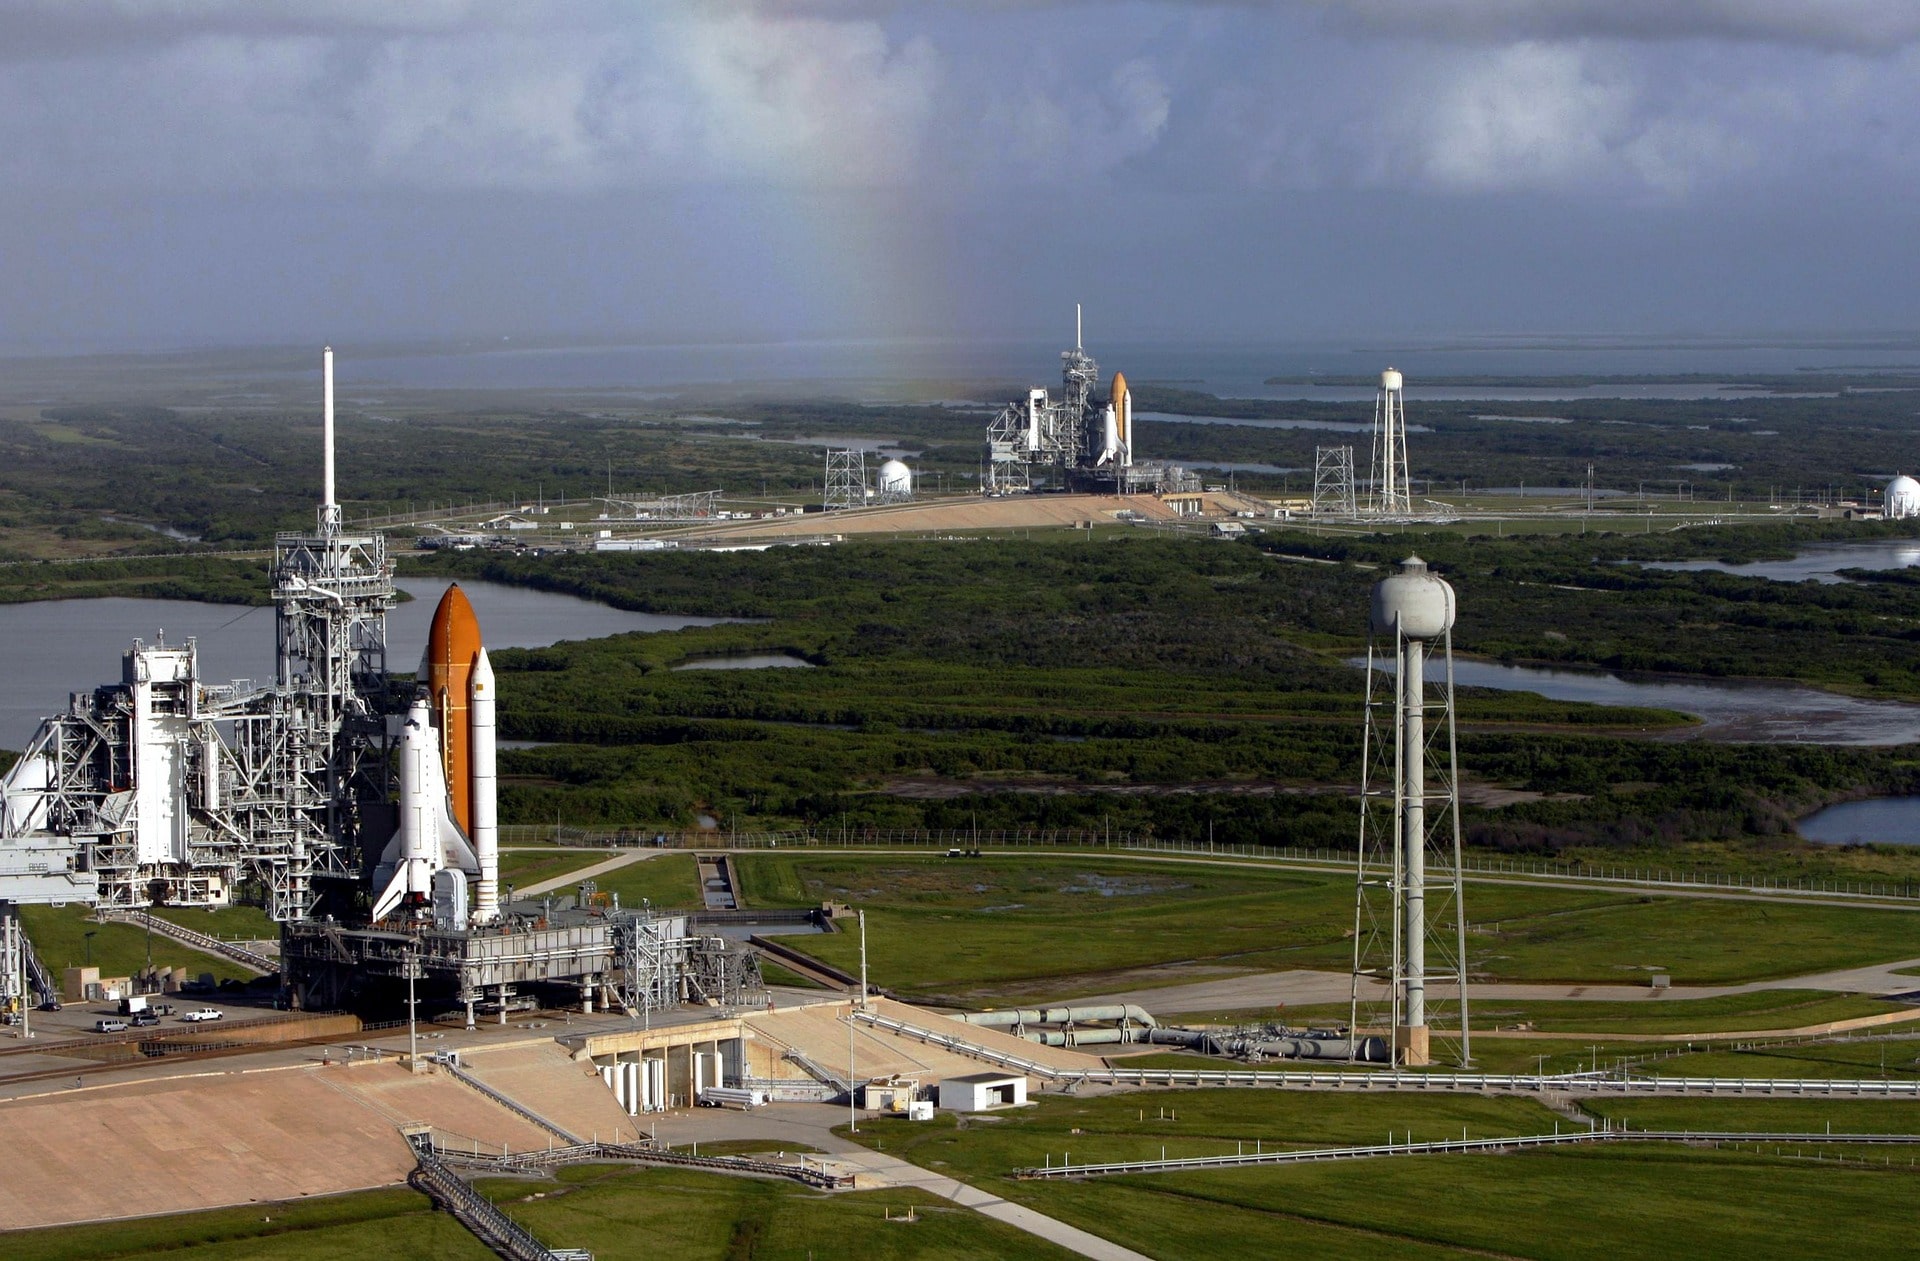 Visit Kennedy Space Center in Florida